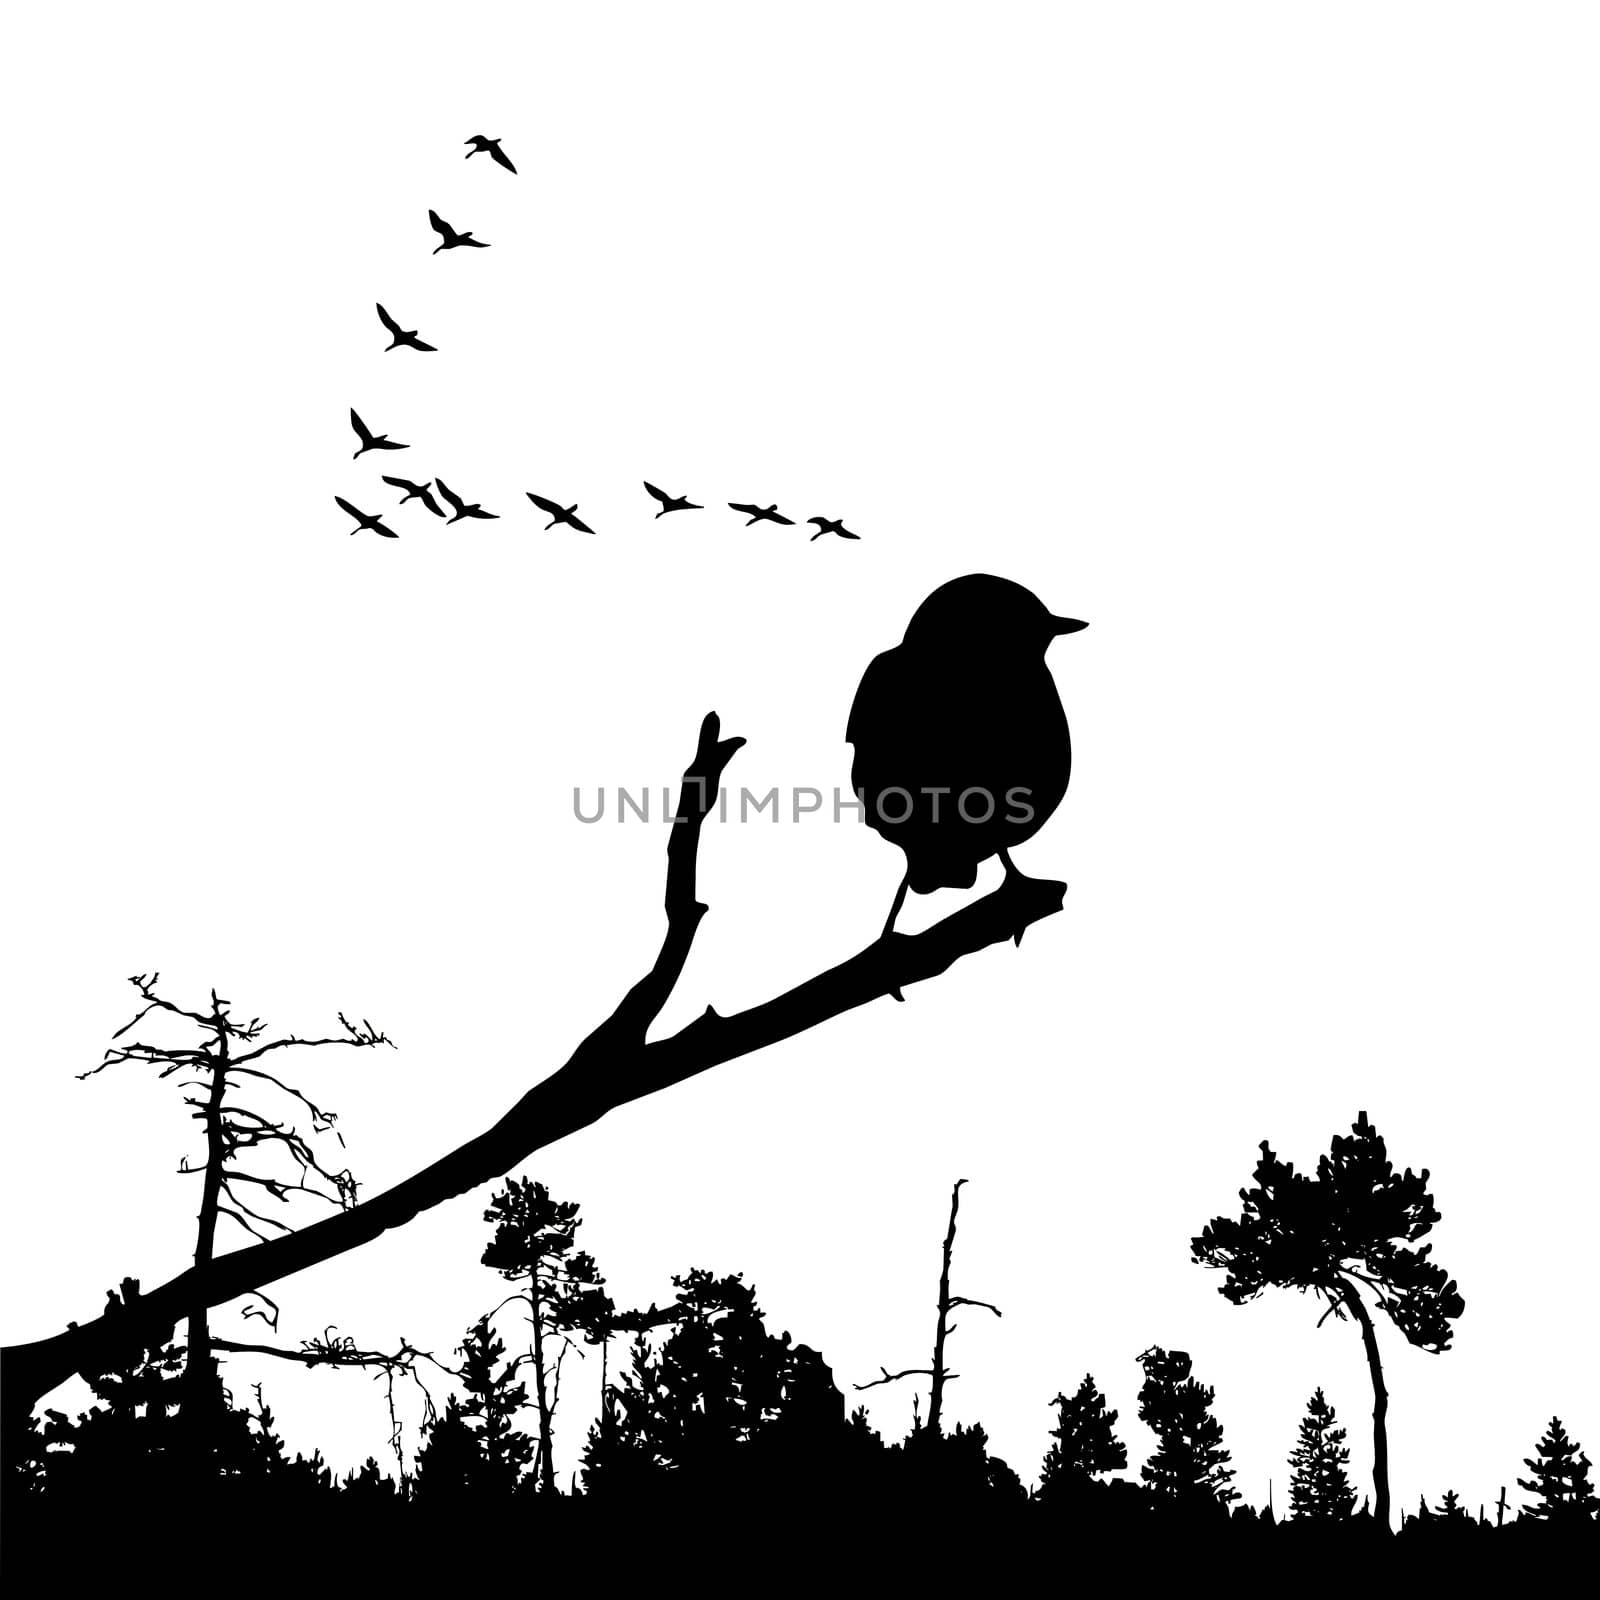 vector illustration of the bird on branch by basel101658